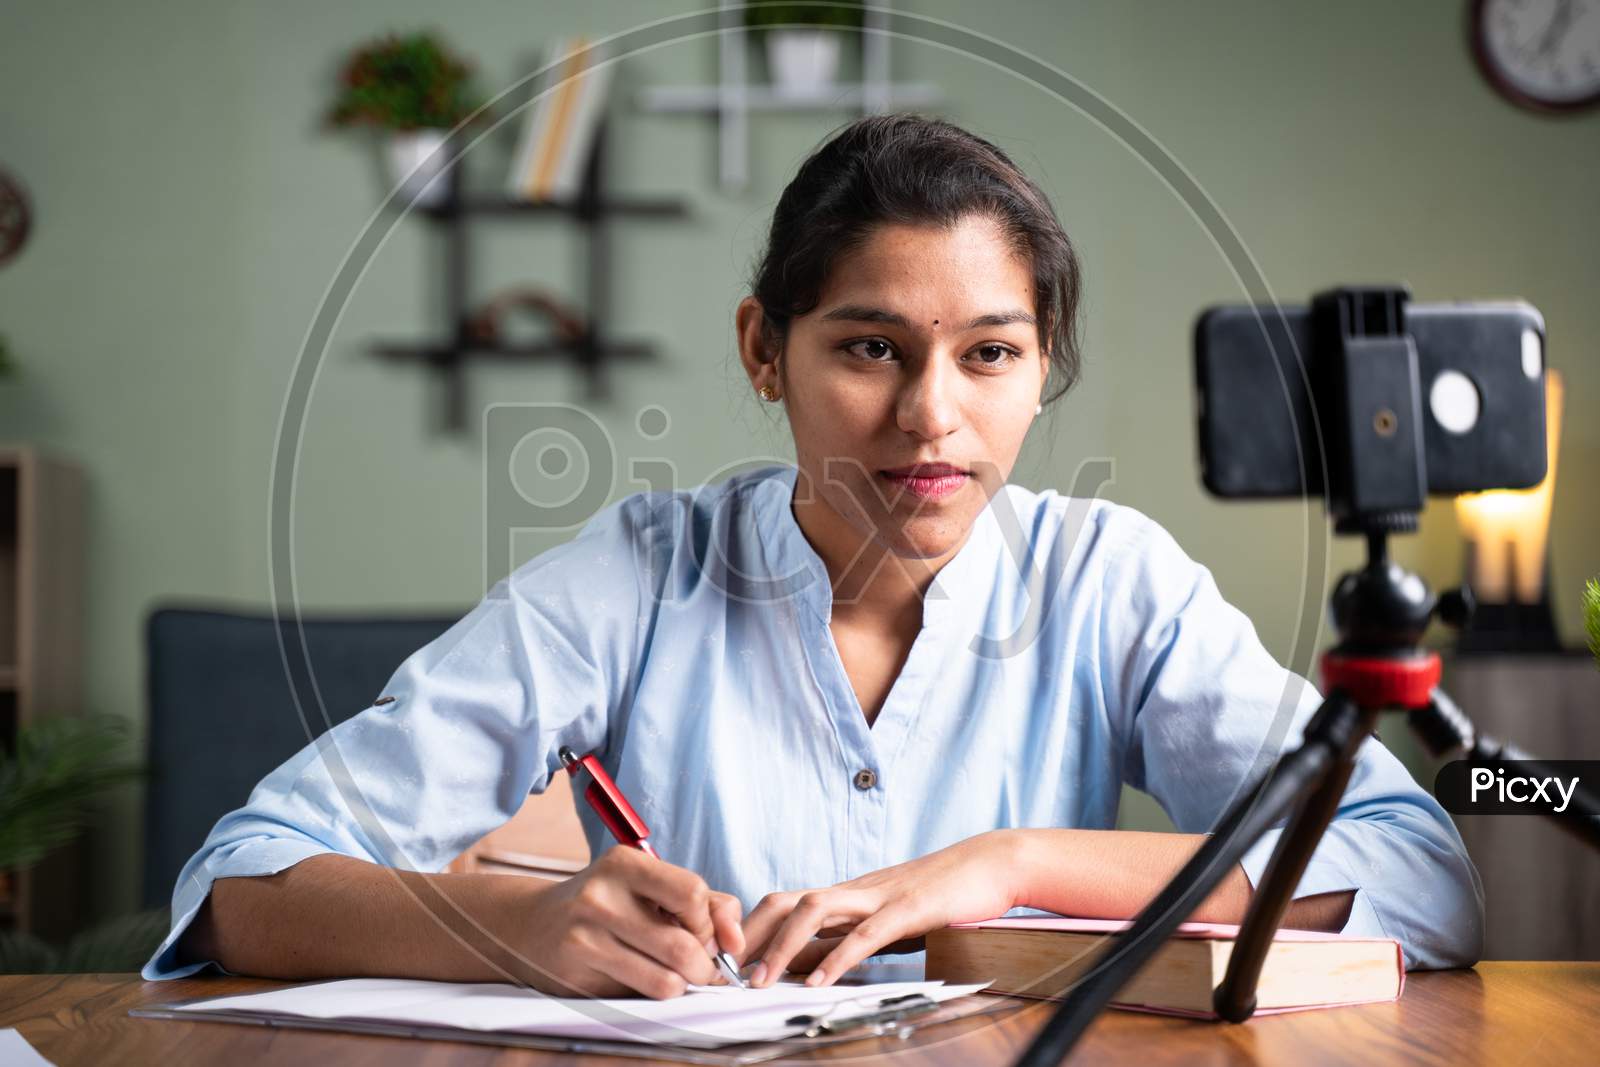 Young College Girl Student Writing Notes By Looking Into Mobile Phone During Online Class - Concept Of New Normal, Virtual Learning, Online Education During Coronavirus Or Covid-19 Pandemic.